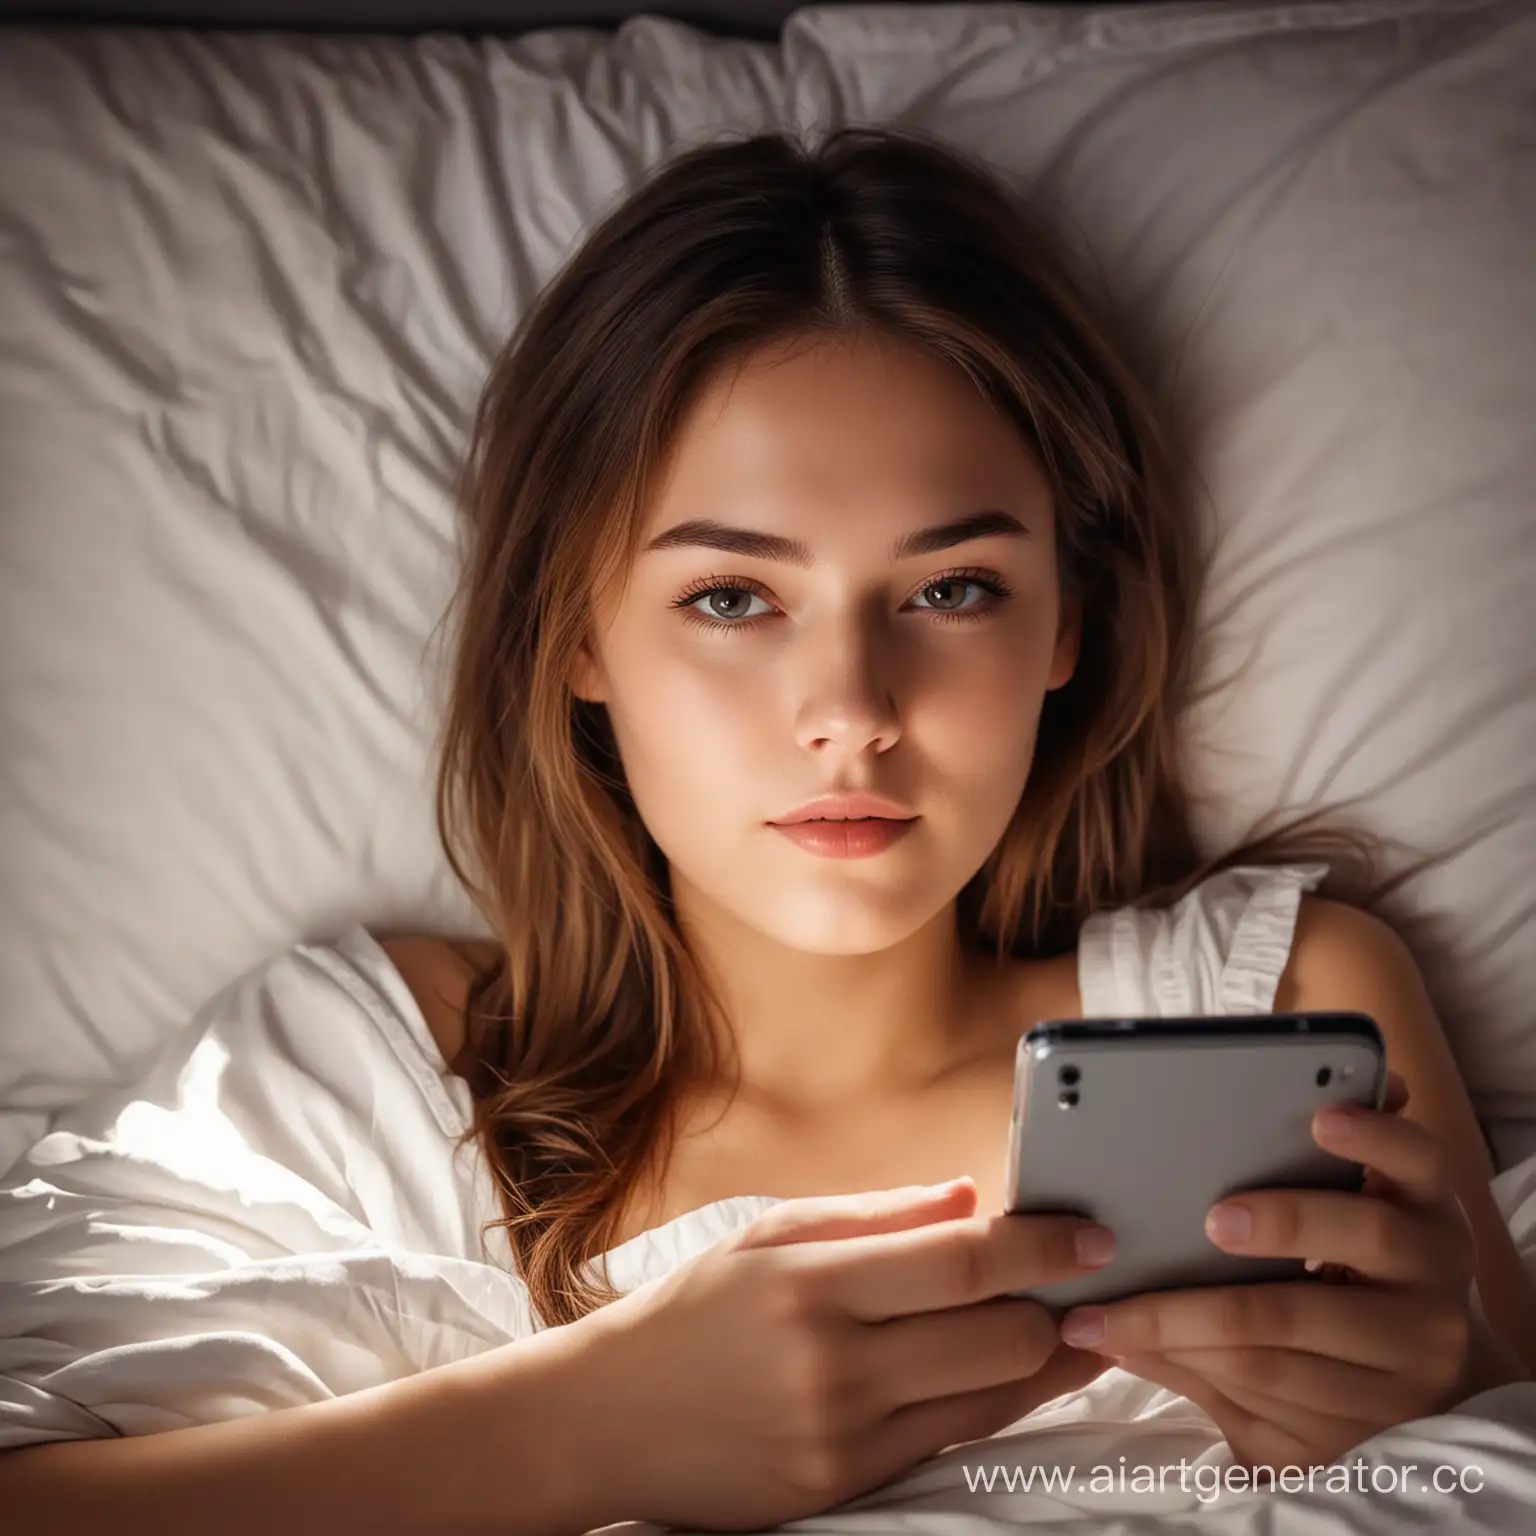 A beautiful girl is lying in bed, the light is off, she is looking at her smartphone contentedly